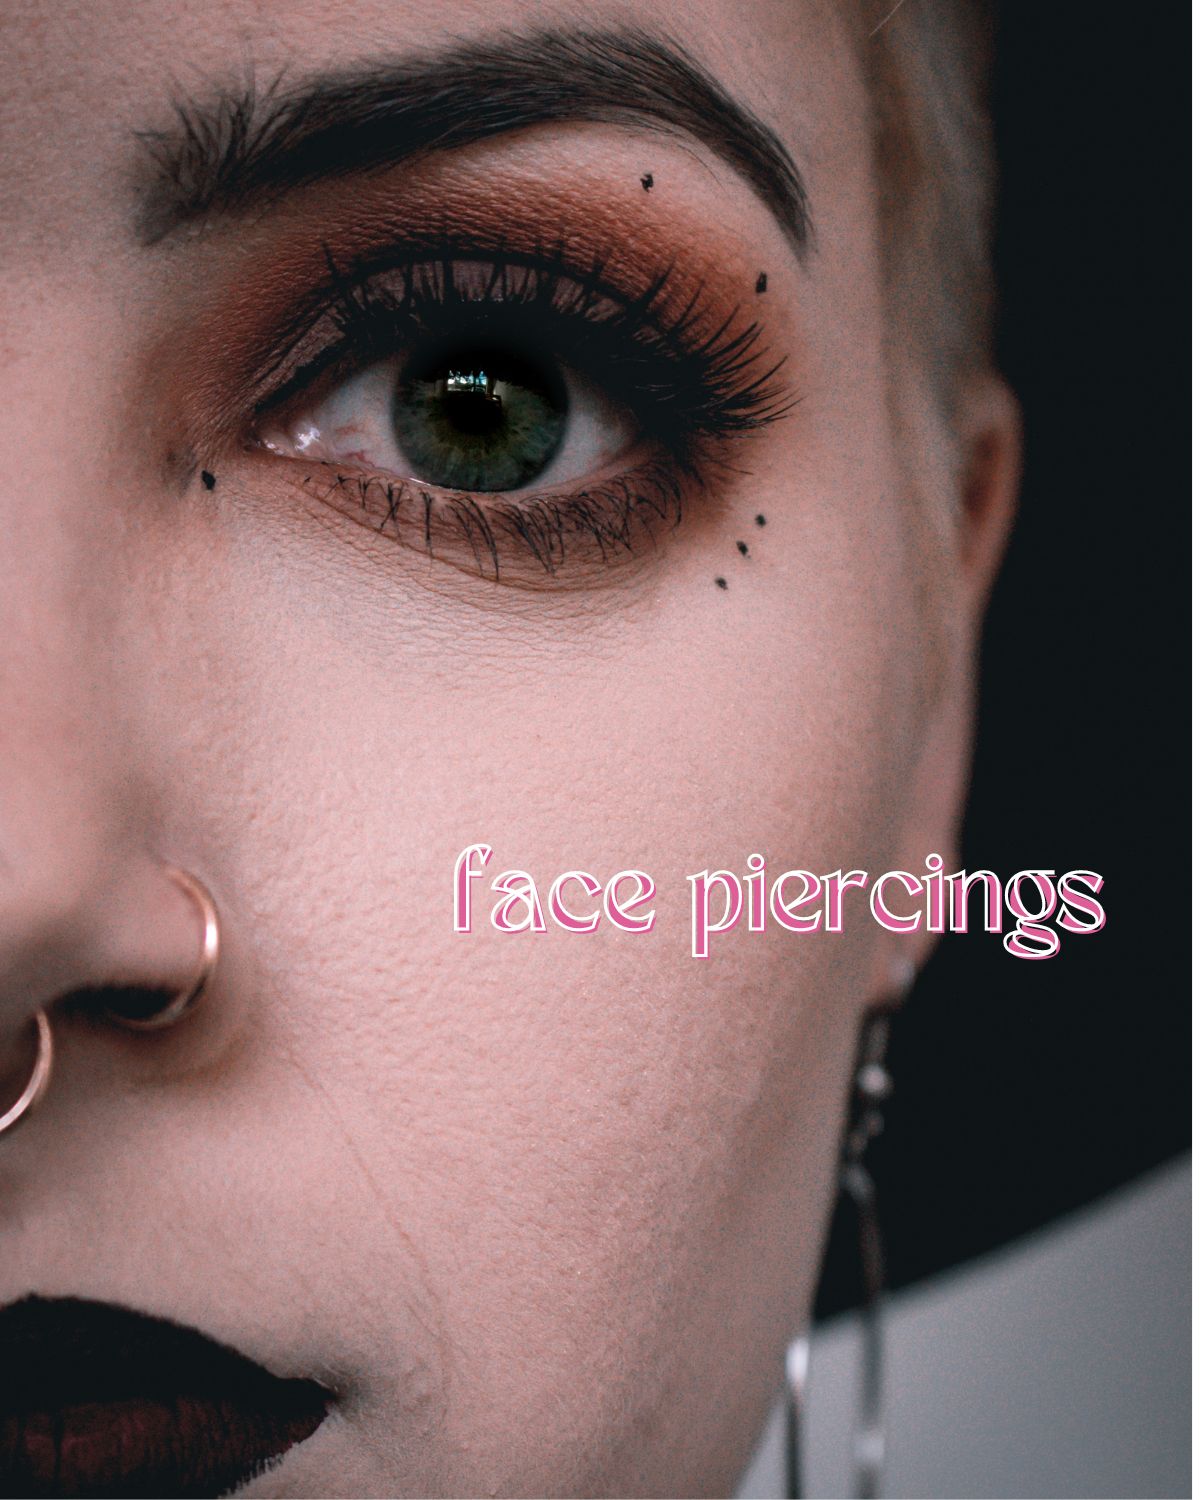 A woman's face with piercings